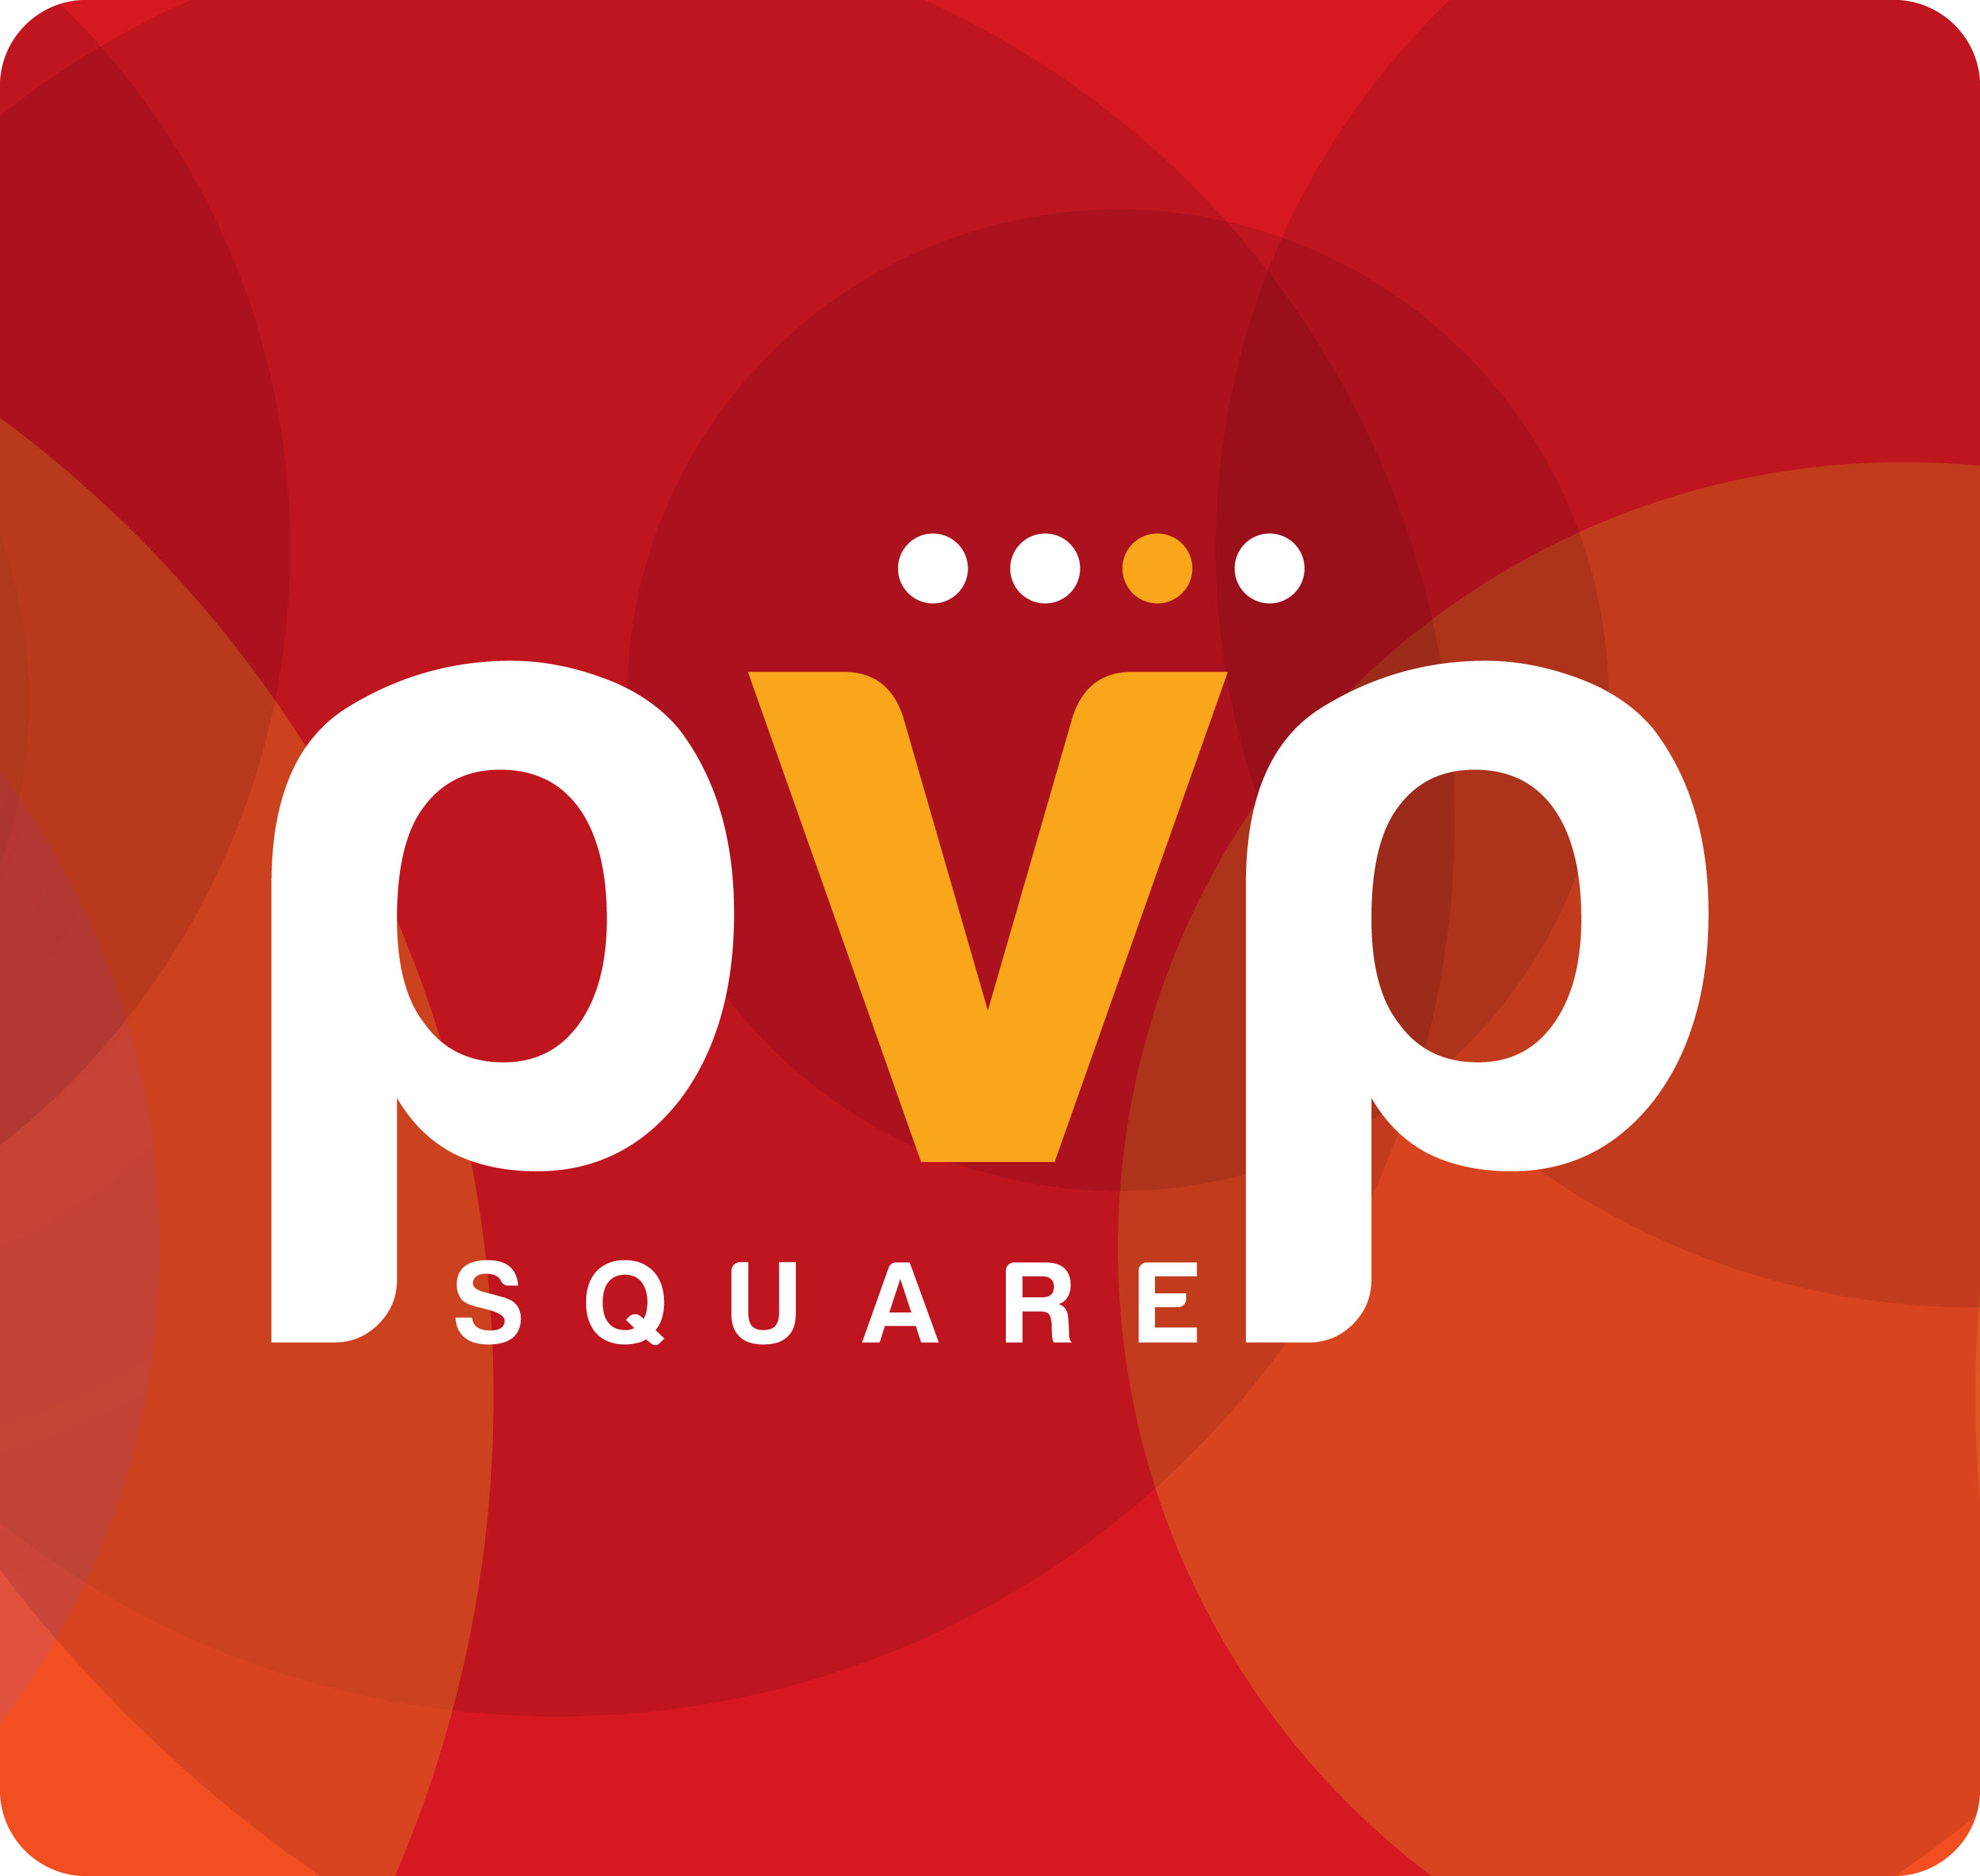 PVP Square|Mall|Shopping